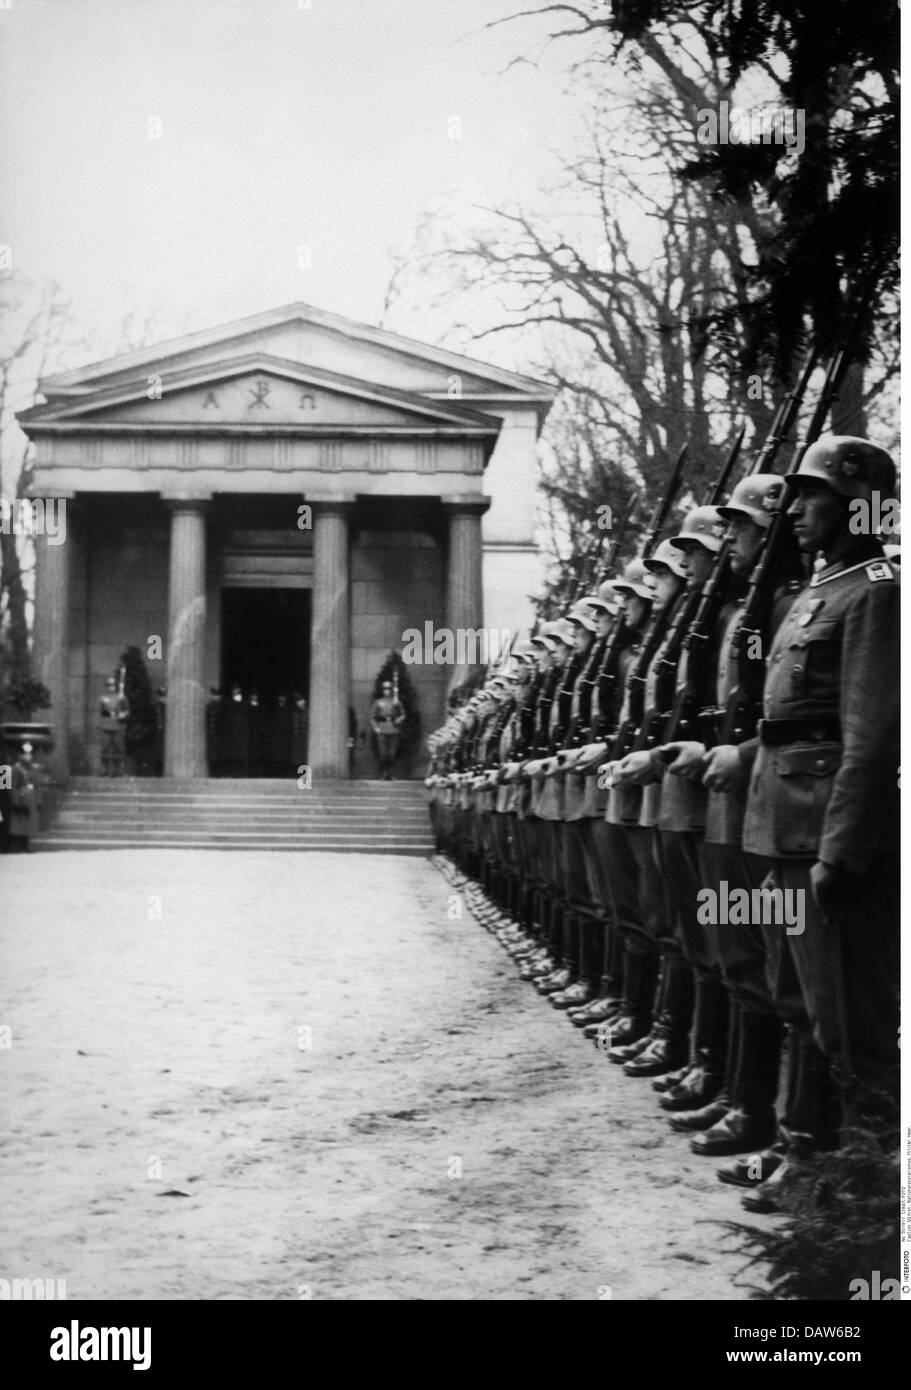 Nazism / National Socialism, military, Wehrmacht, army, guard of honour of Wach Regiment Berlin (Berlin Guard Regiment) formed up in front of the mausoleum of Emperor Wilhelm I at Charlottenburg, on the occasion of the 50th anniversary of his death, 9.3.1938, Additional-Rights-Clearences-Not Available Stock Photo